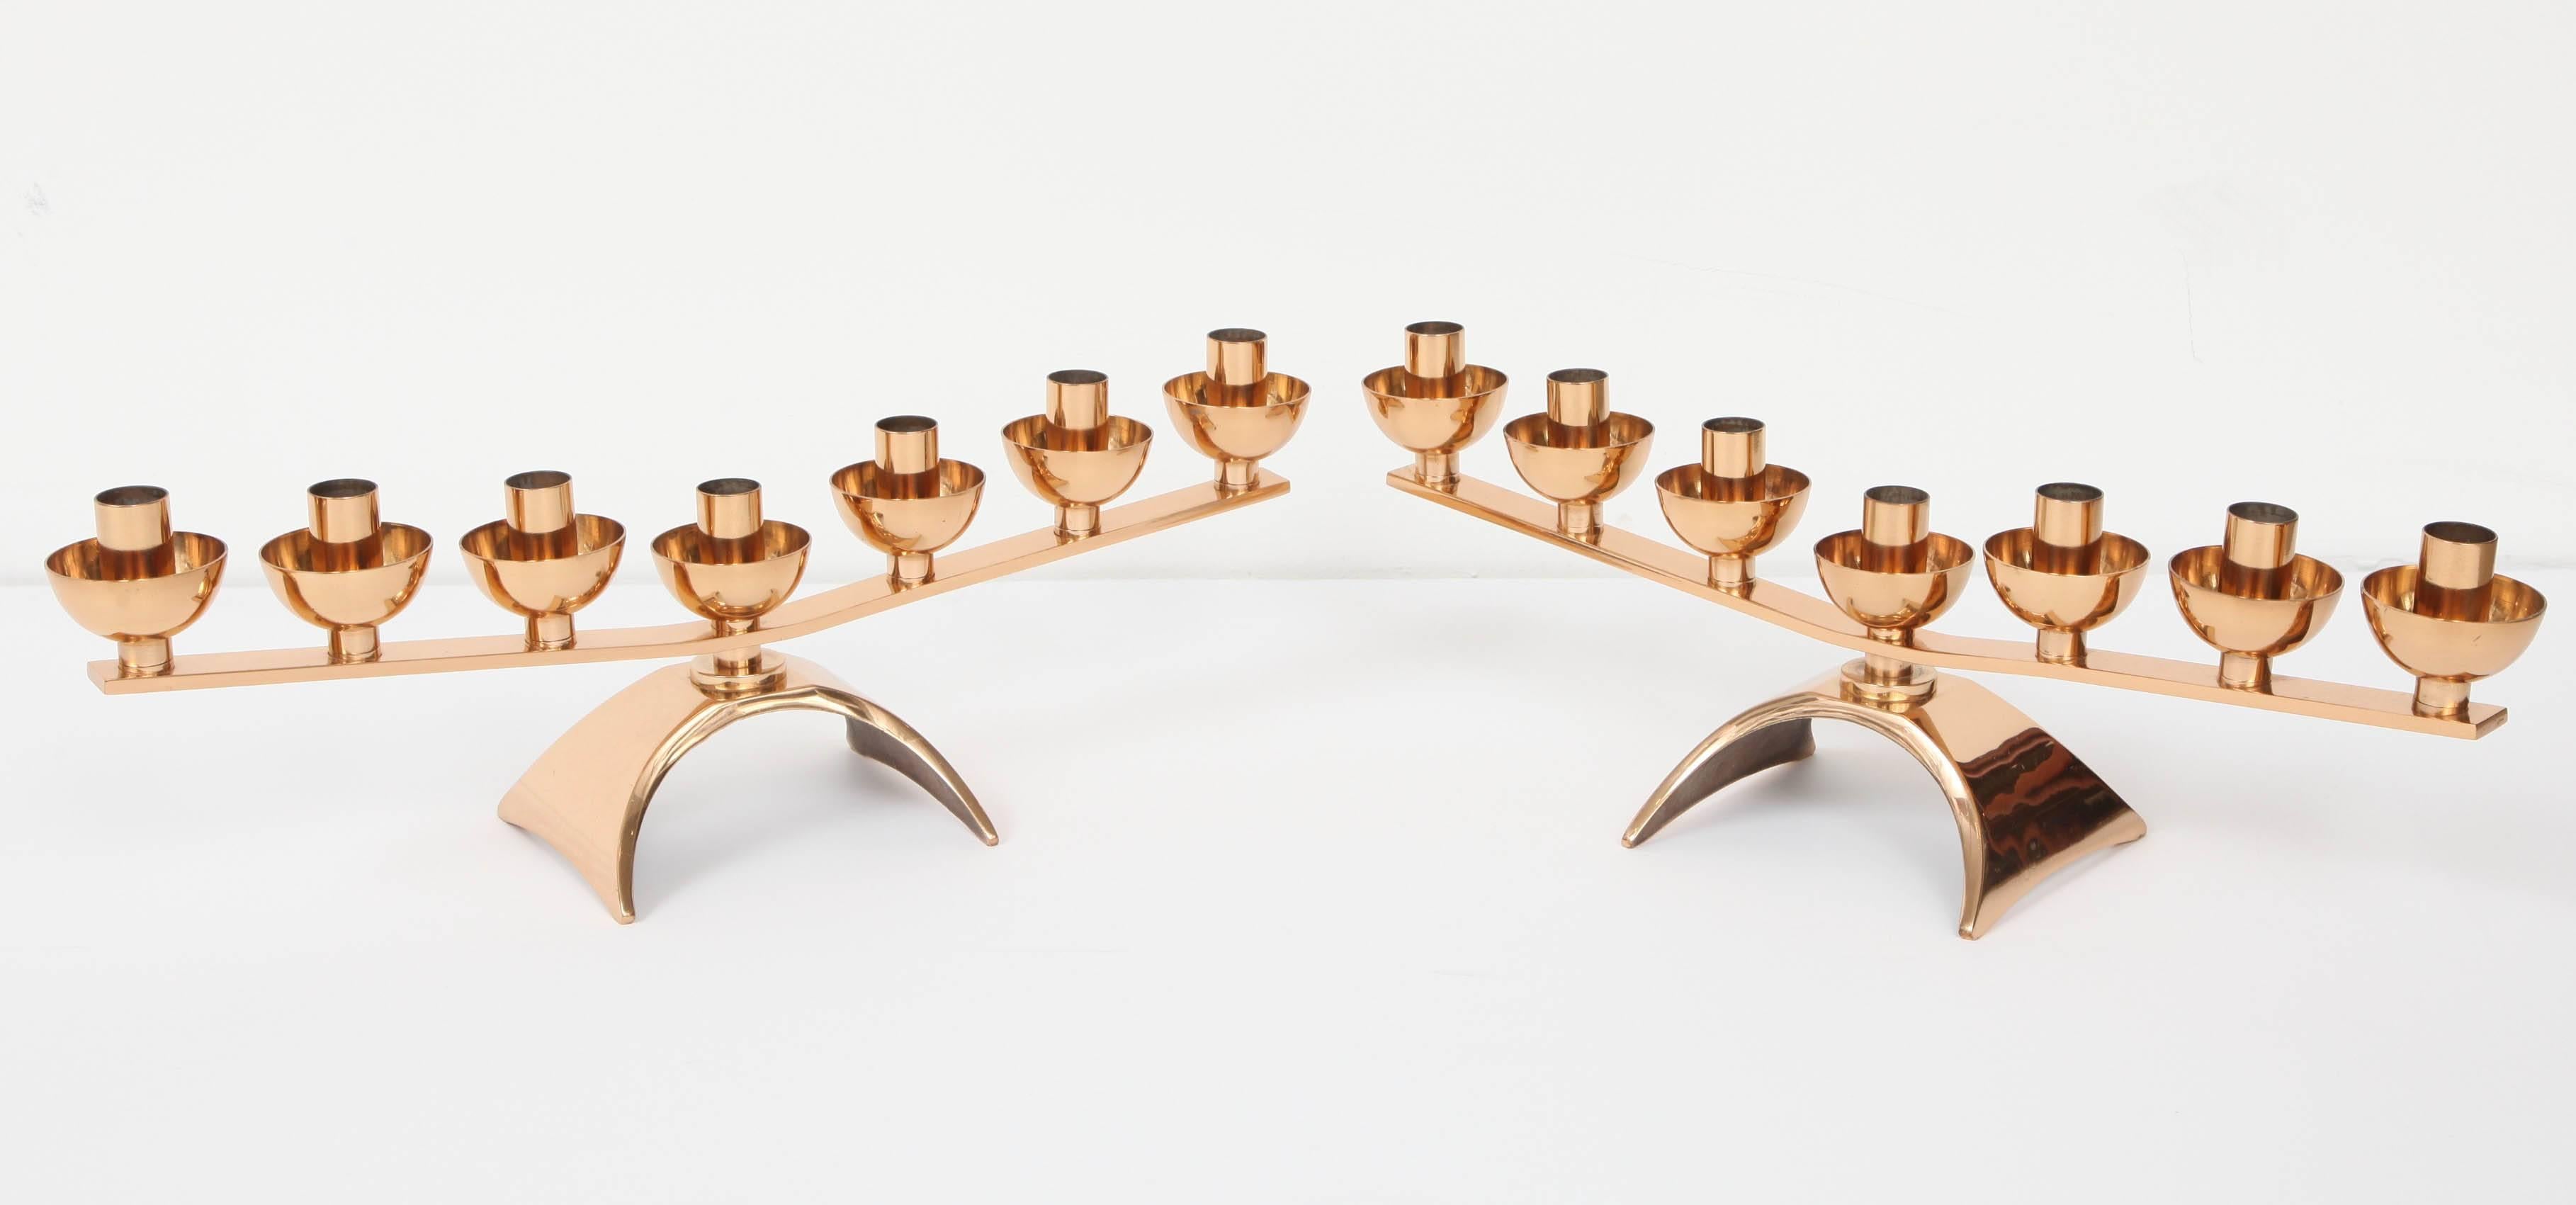 Pair of Brass Mid-Century Modern Candleholders, circa 1960 For Sale 5